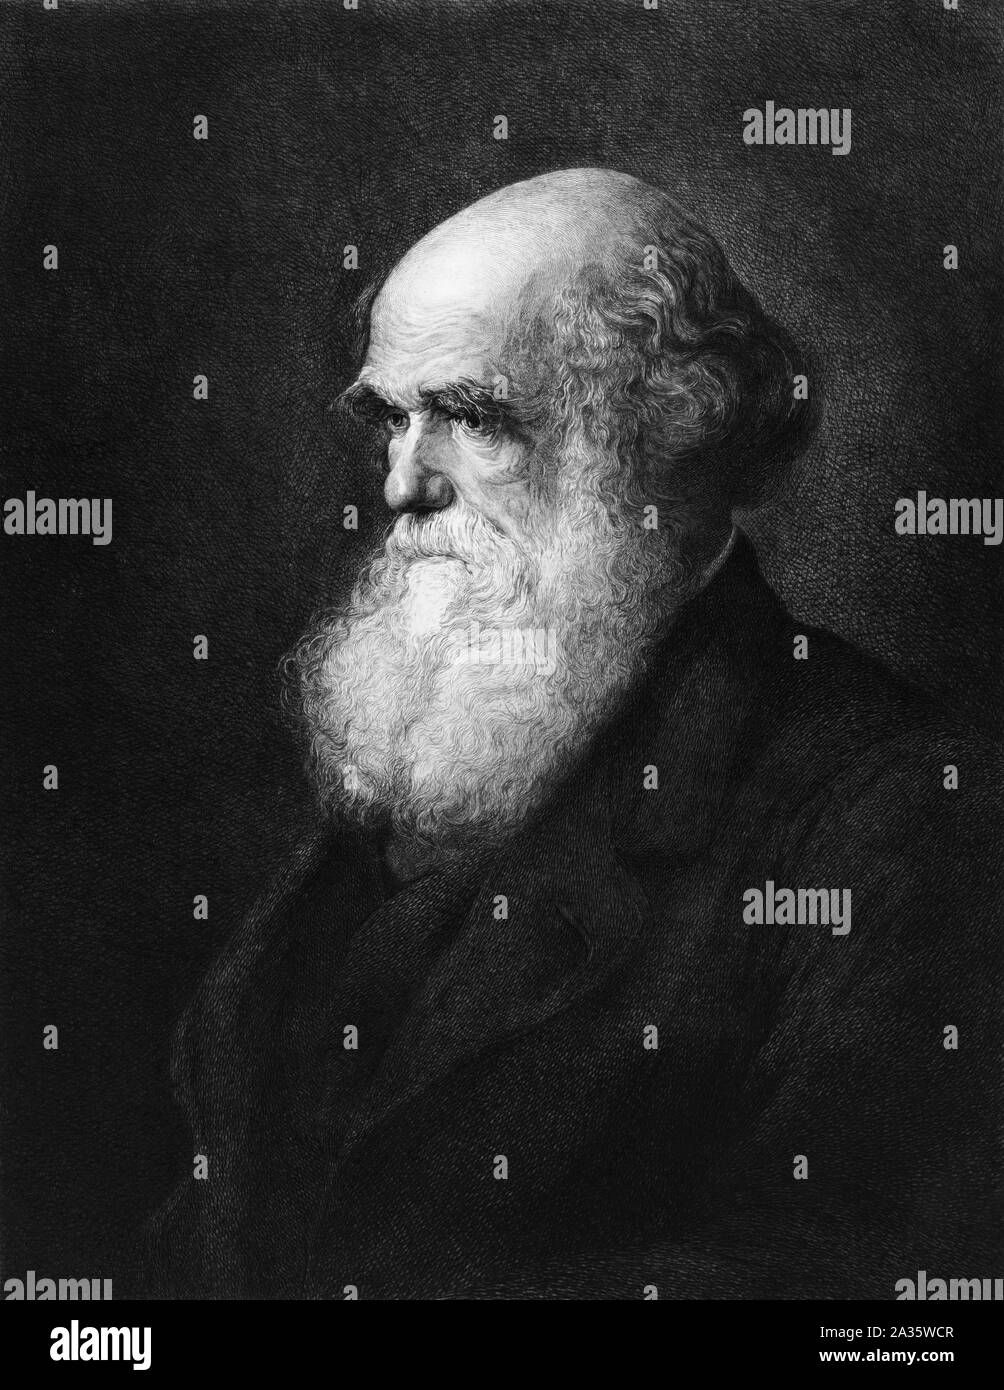 Vintage portrait of English naturalist, geologist and biologist Charles Darwin (1809 – 1882), whose famous works on evolutionary theory include “On the Origin of Species” in 1859 and “The Descent of Man” in 1871. Etching circa 1890 by Gustave Mercier, based on an 1875 painting by artist Walter William Ouless and published by Robert Lindsay of Philadelphia. Stock Photo